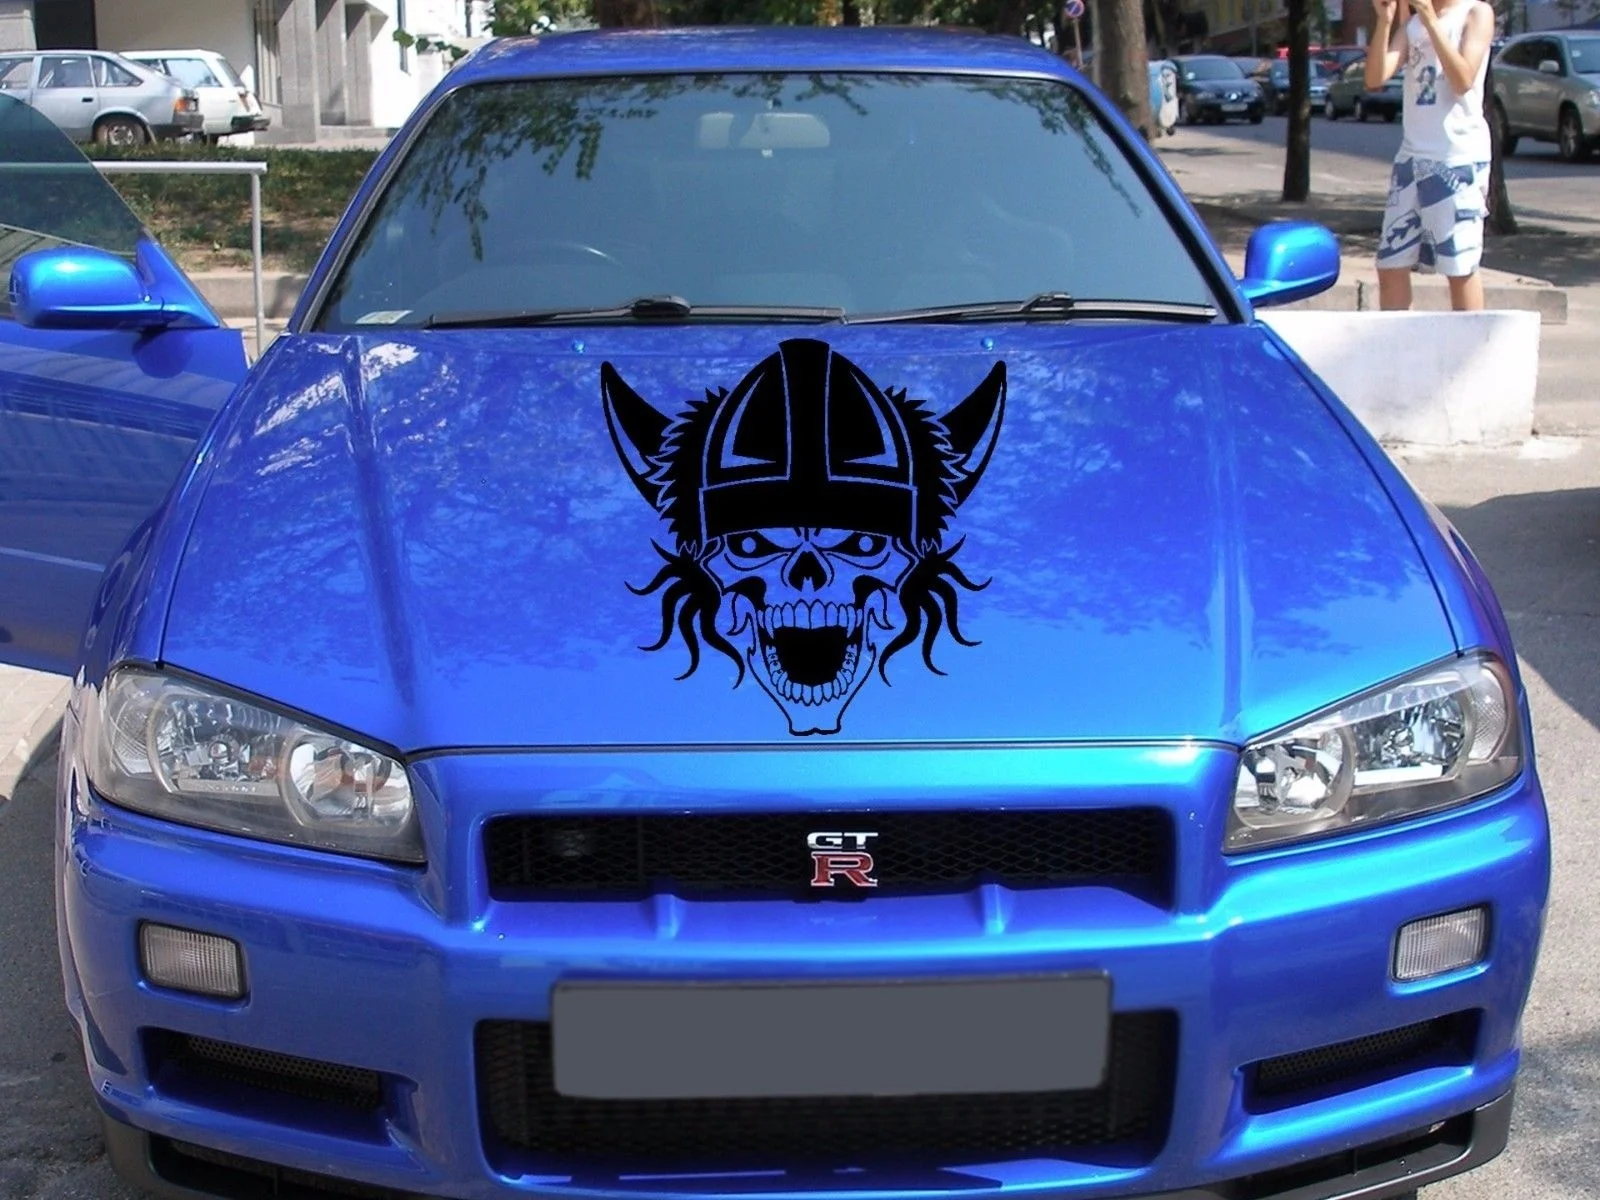 

For Multiple Color Graphics Strip Evil Die Skull Soldier Car Racing Decal Sticker